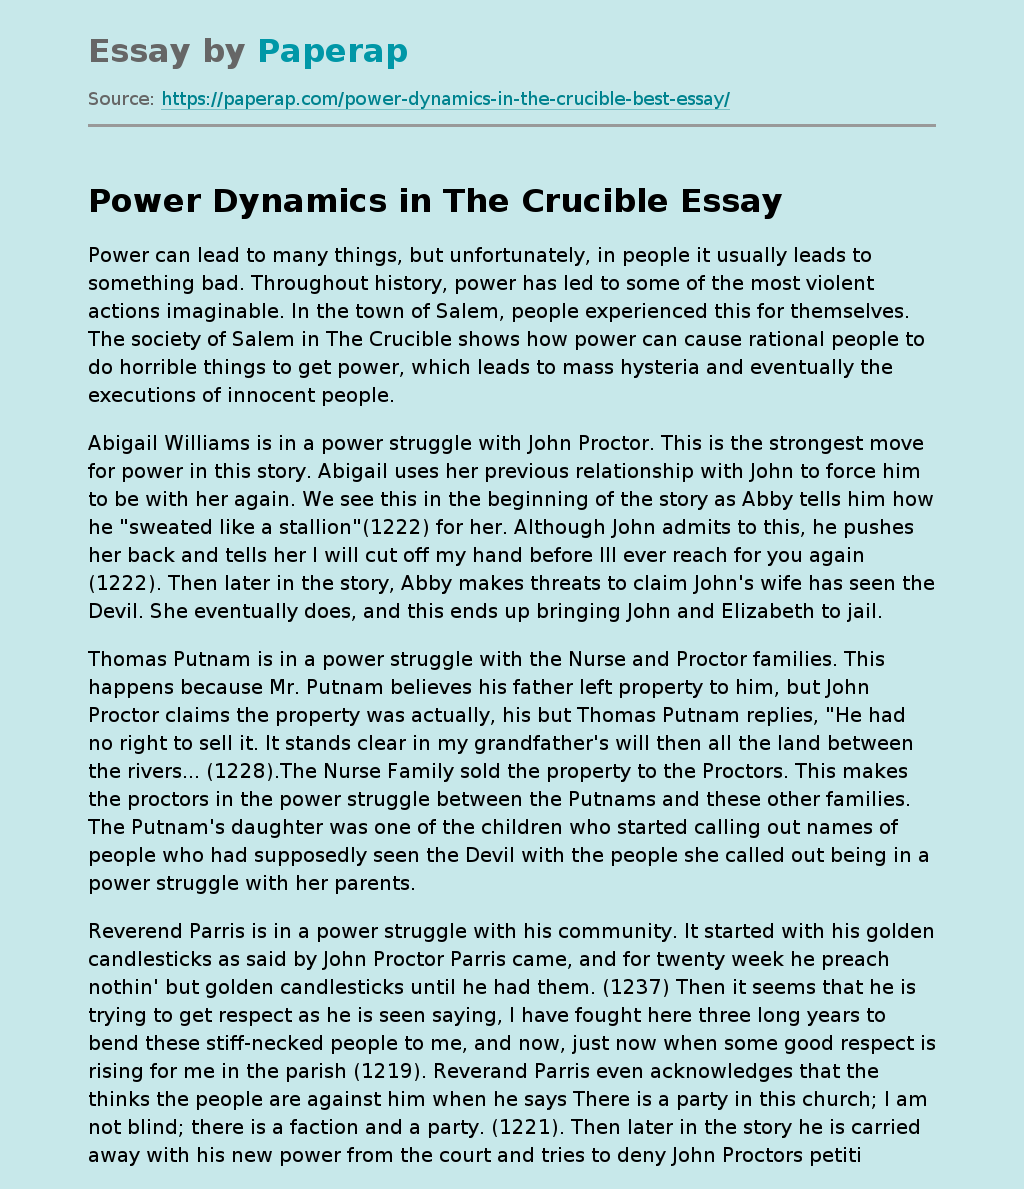 Power Dynamics in The Crucible